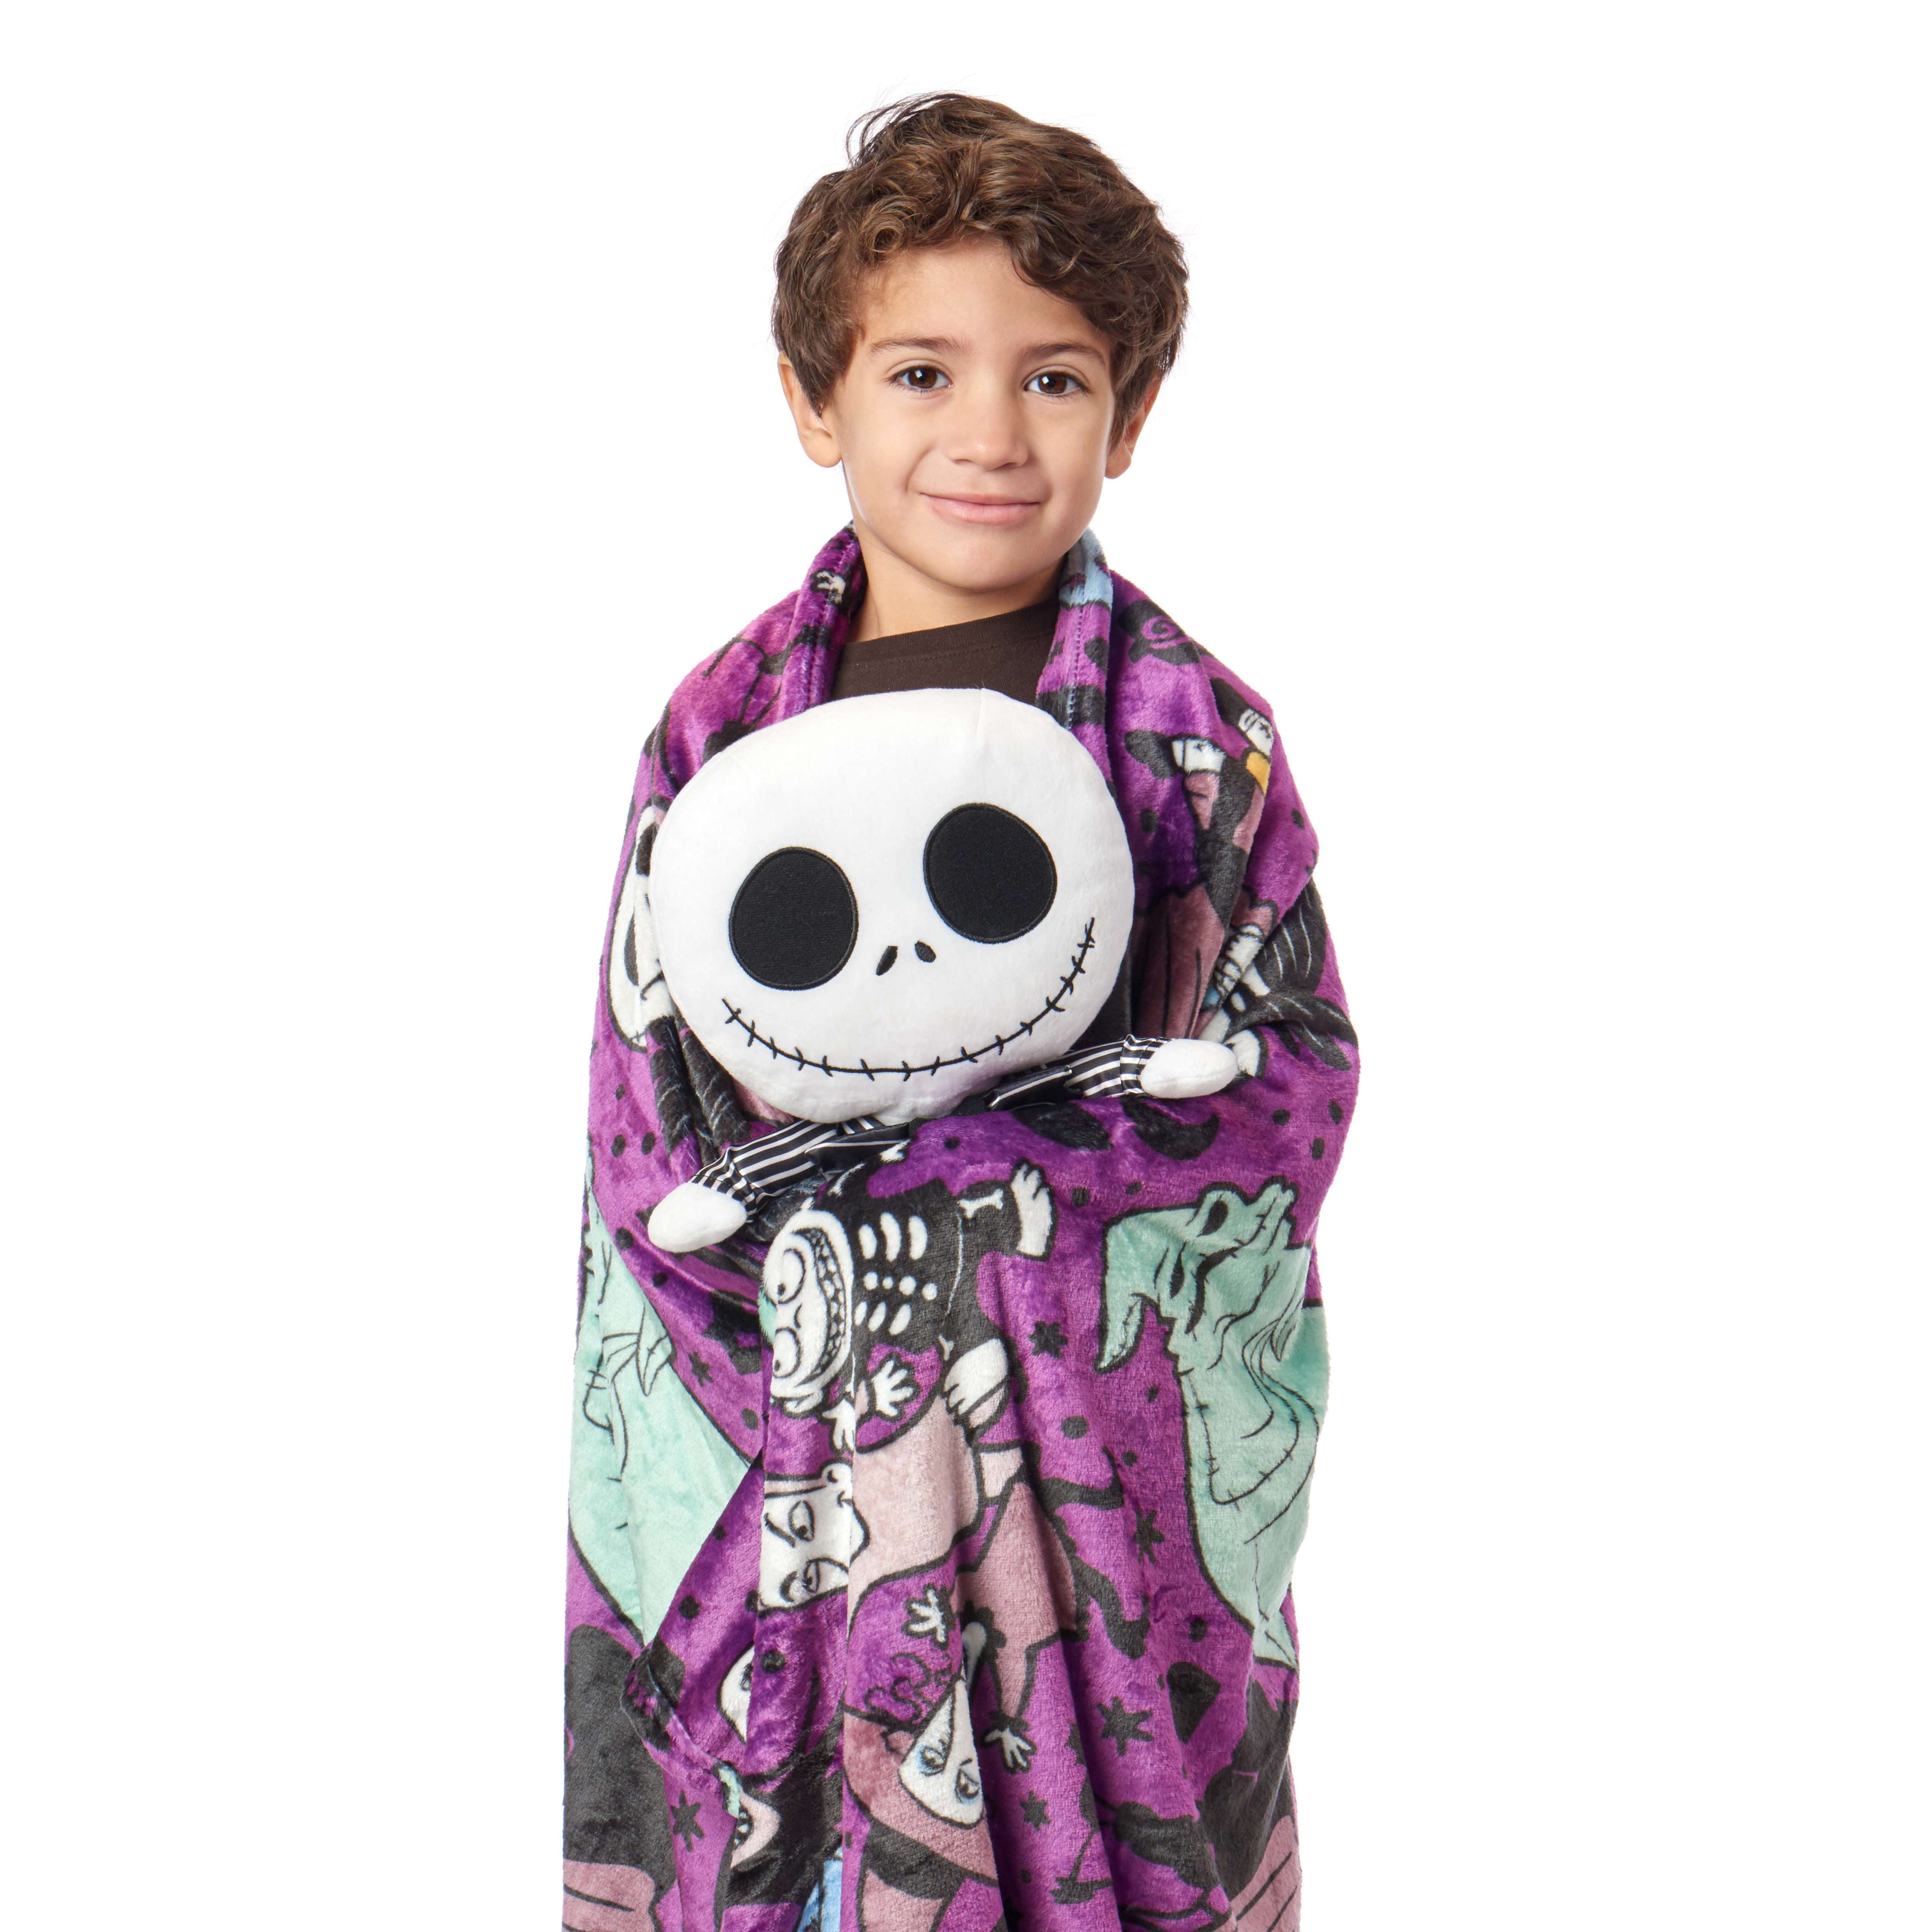 Nightmare Before Christmas Kids Hugger with Silk Touch Throw Blanket, 50x60 inches Purple